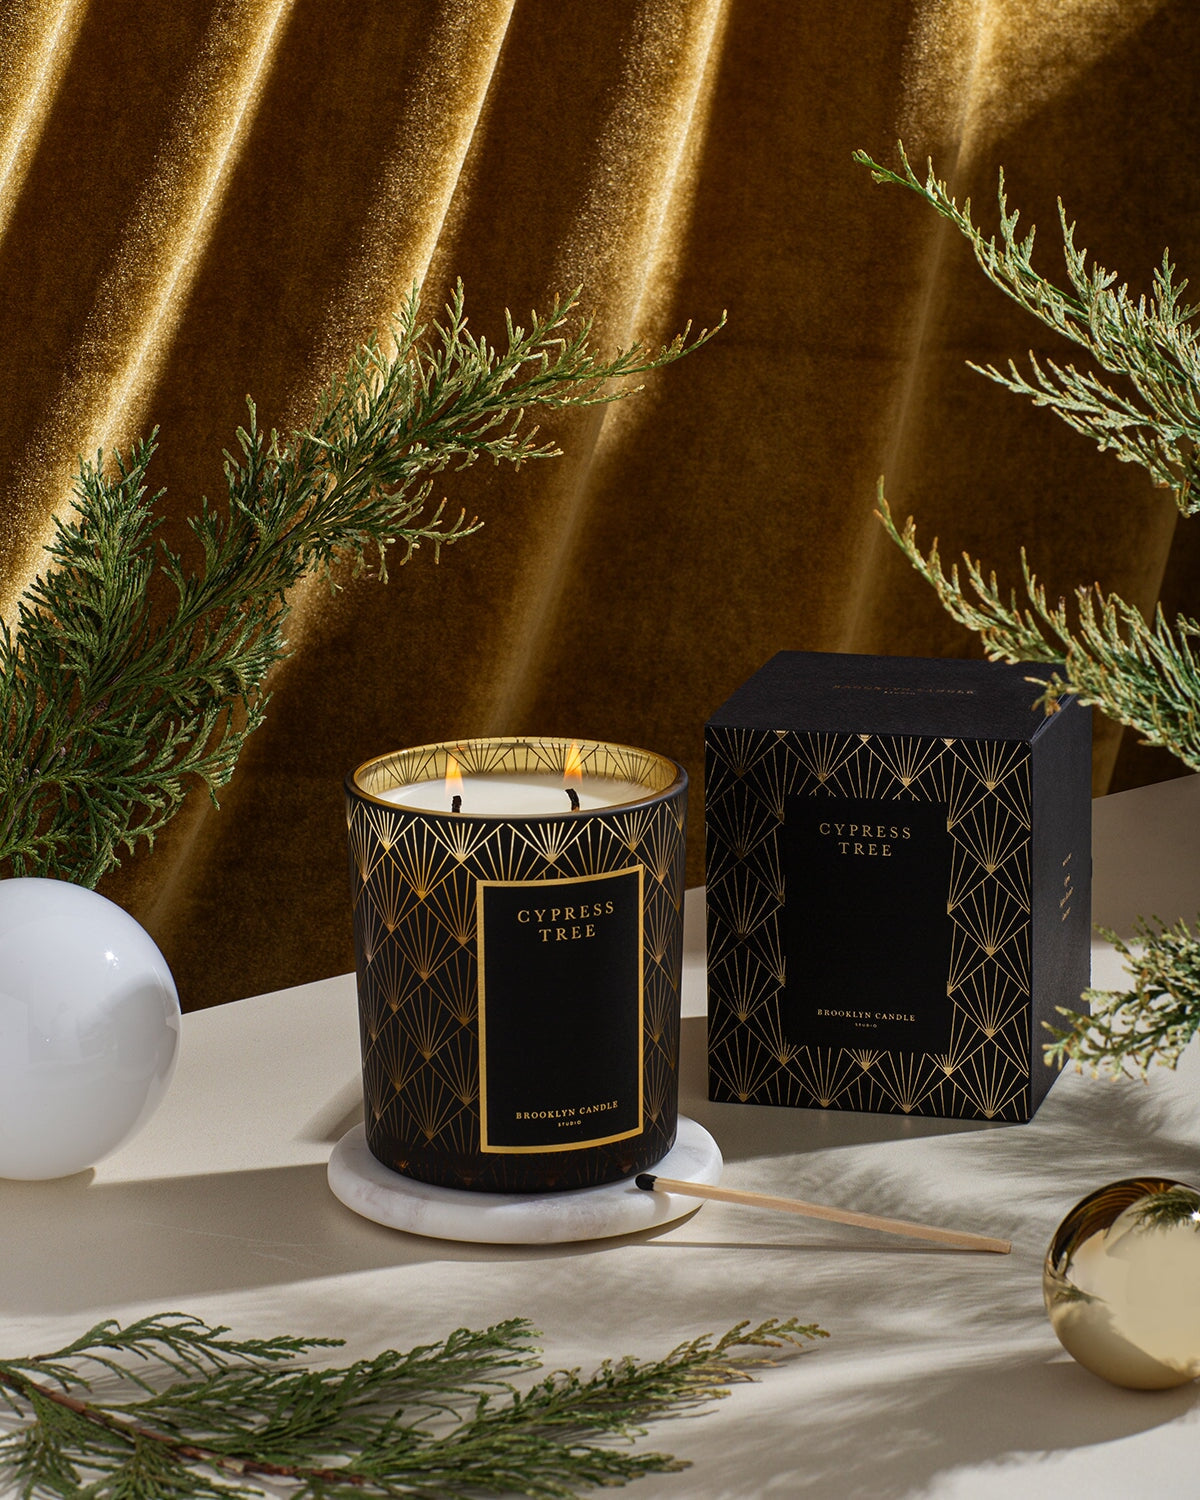 CYPRESS TREE HOLIDAY CANDLE